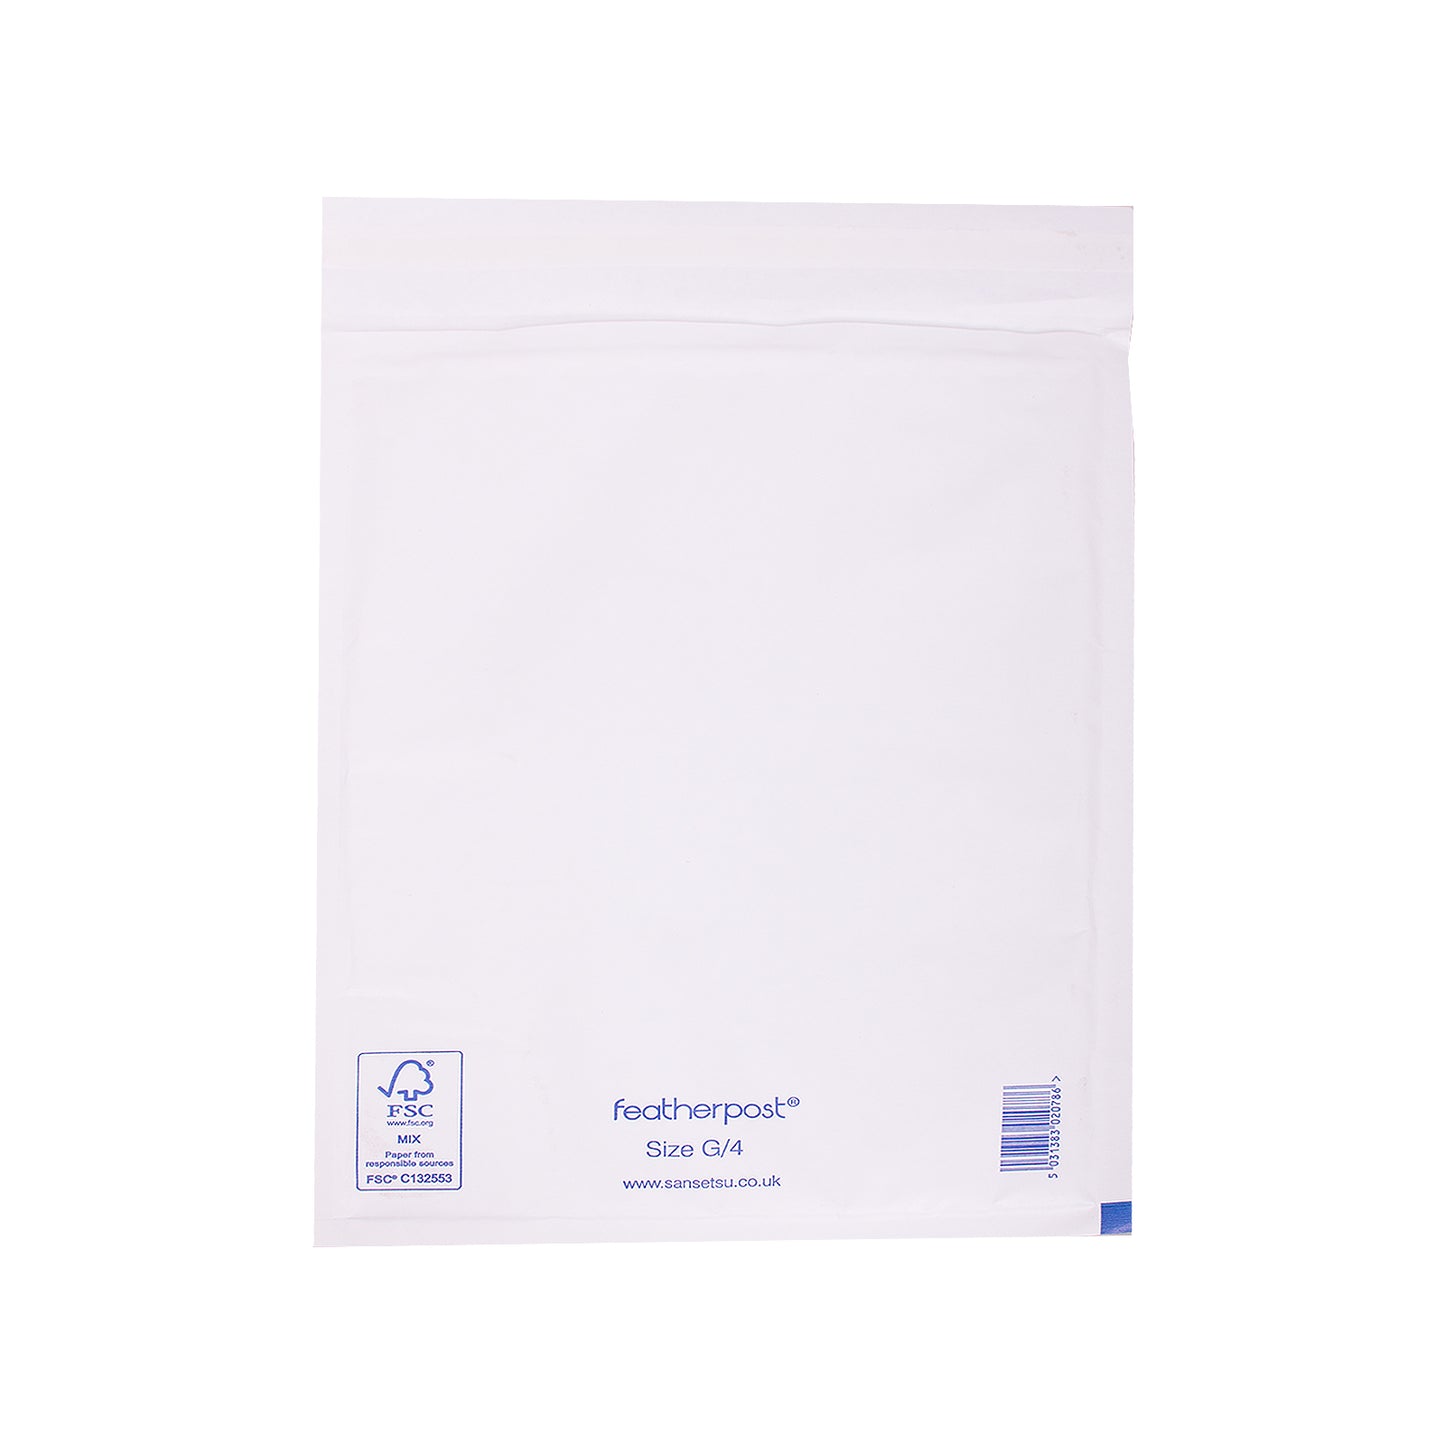 Padded Bubble Envelope in White | SR Mailing | Sustainable eCommerce Packaging